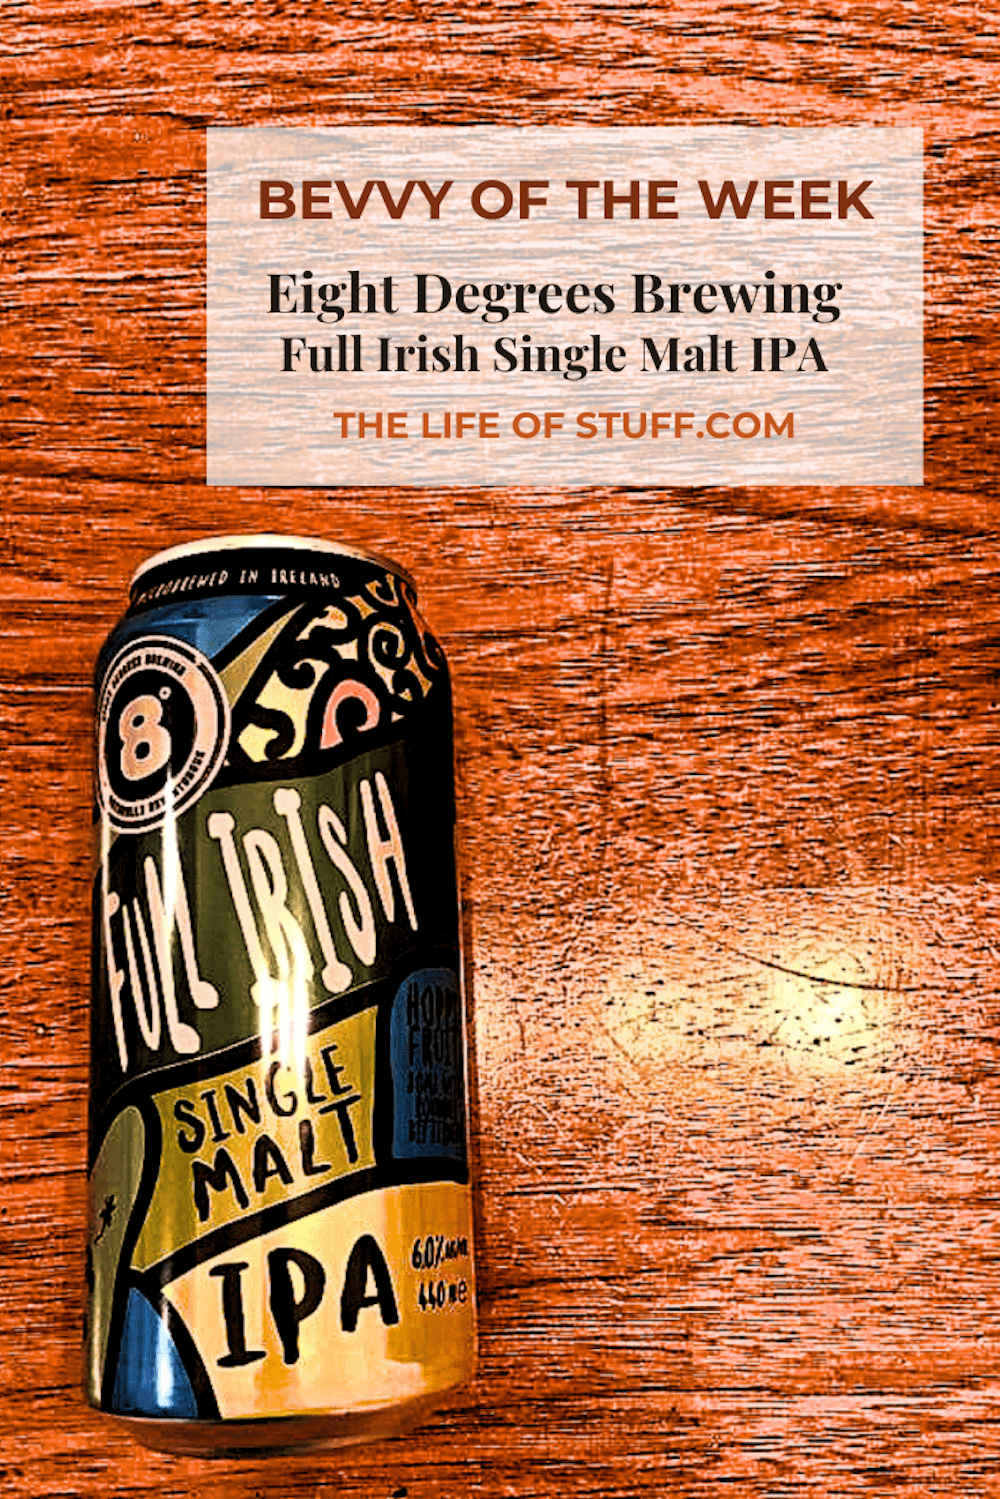 Bevvy of the Week - Eight Degrees Brewing - Full Irish Single Malt IPA - The Life of Stuff